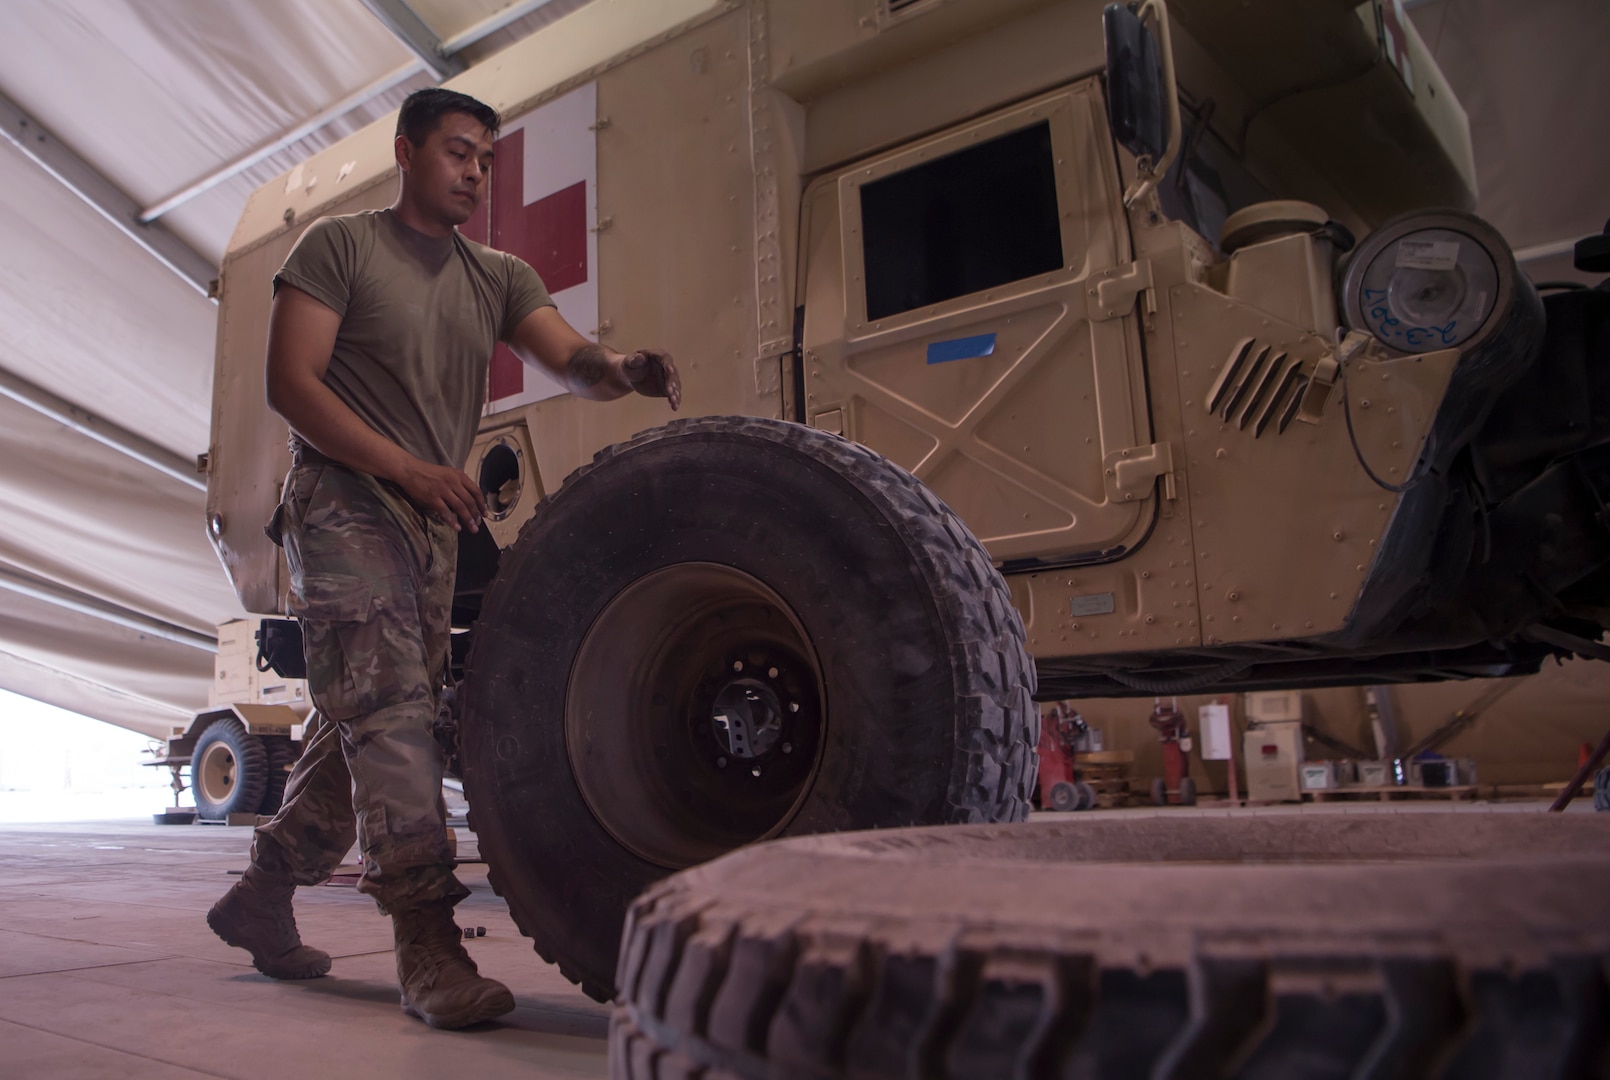 U.S. Army Spc. Abraham Garcia, Echo Company, 1st Battalion, 43rd Air Defense Artillery (ADA) Battalion, 11th ADA Brigade wheeled vehicle mechanic, moves a military vehicle wheel as part of a routine tire rotation Jan. 28, 2019, at Al Udeid Air Base, Qatar. Soldiers of Echo Company perform mechanical work and repairs for various equipment and assets that support Al Udeid’s air defense capabilities, including surface-to-air missile systems. (U.S. Air Force photo by Tech. Sgt. Christopher Hubenthal)